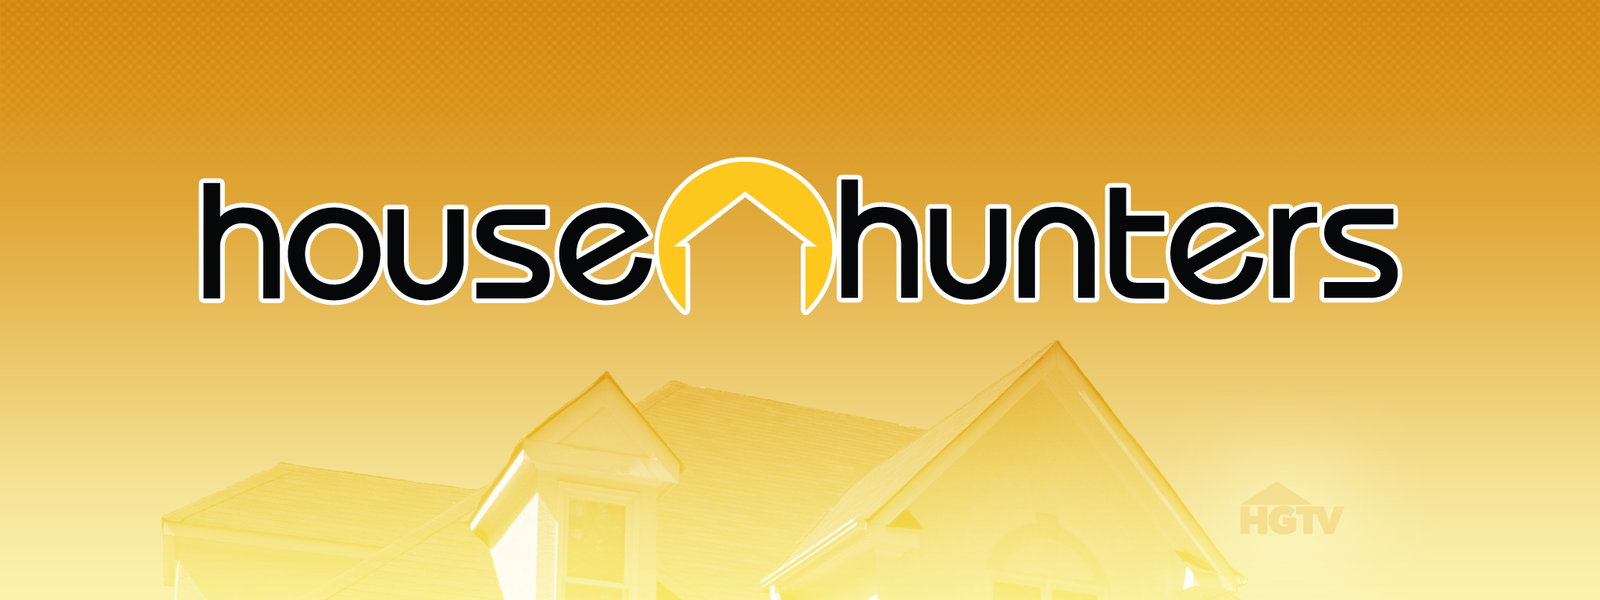 house hunters, reality, tv, show, hgtv, property, home, houses, episodes